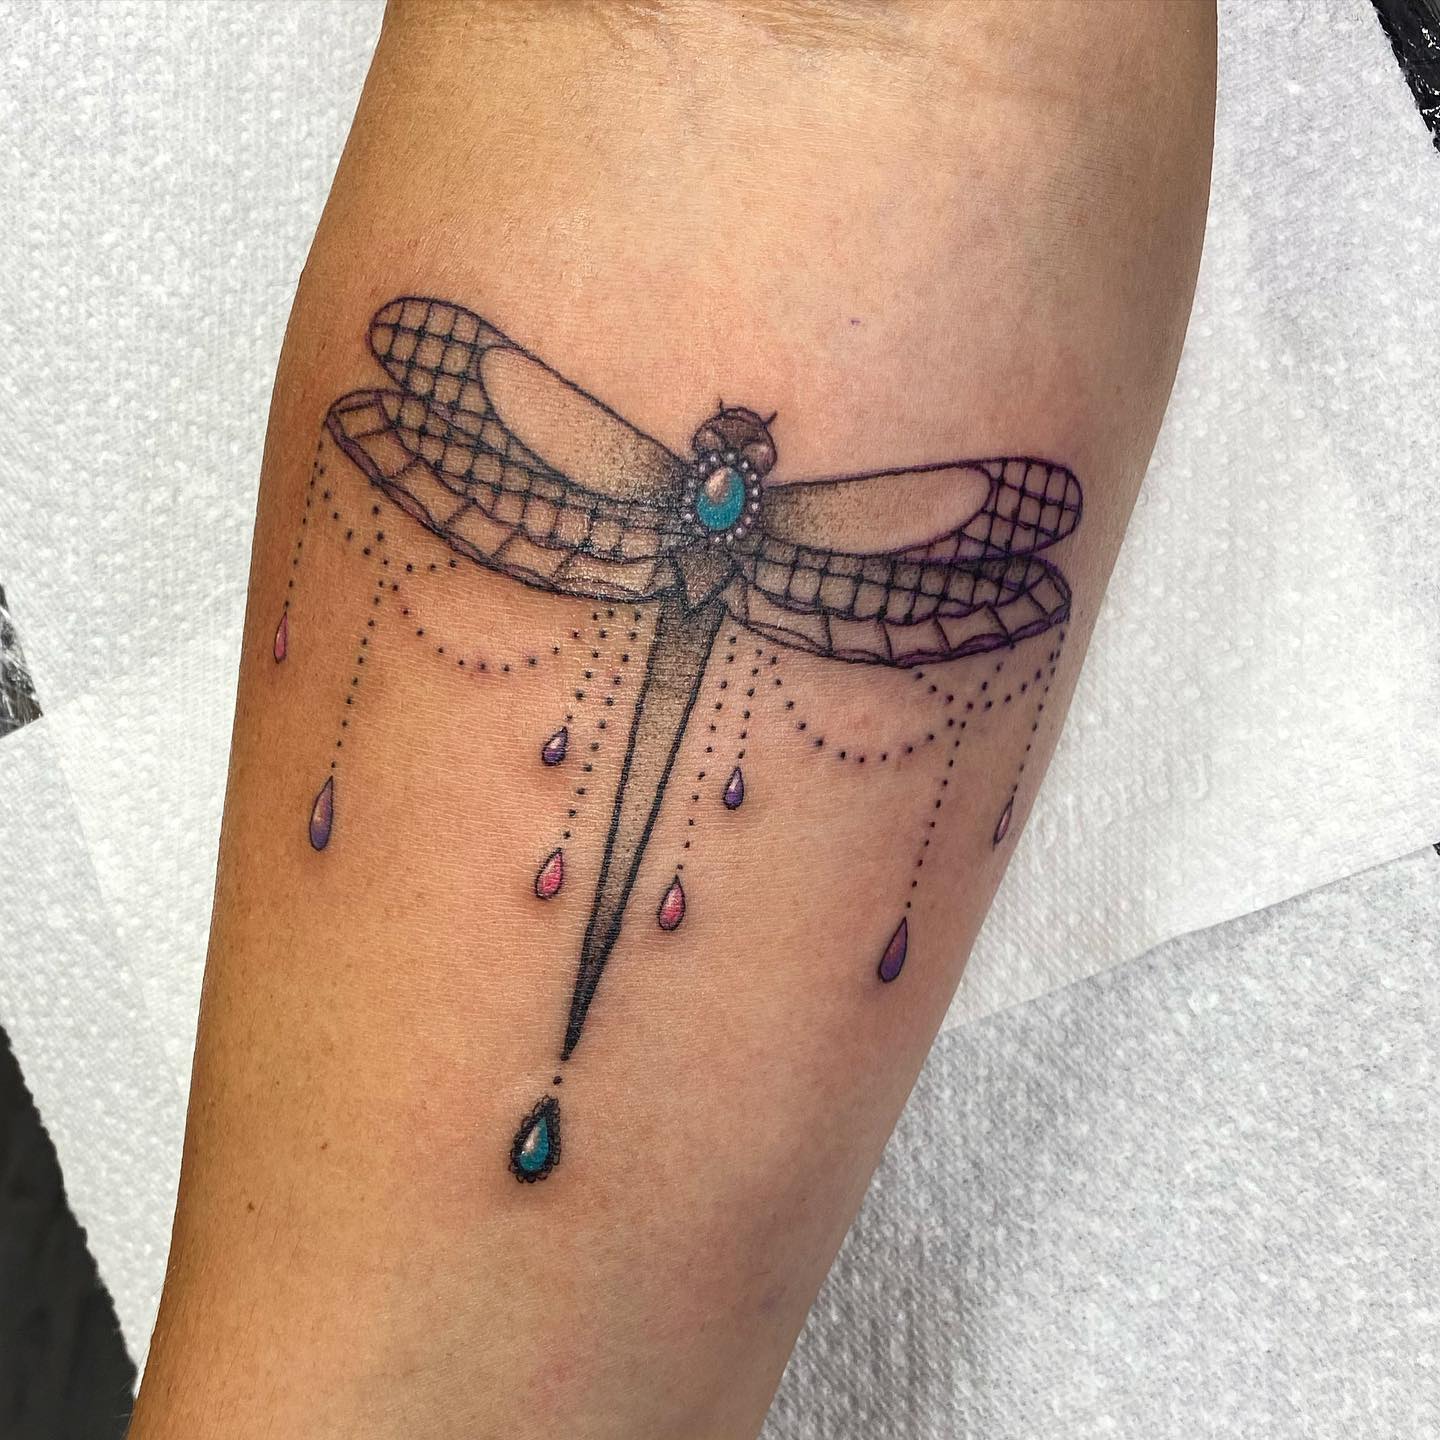 Dragonfly Tattoos And Dragonfly Tattoo Meanings-Dragonfly Tattoo Designs  And Ideas - HubPages